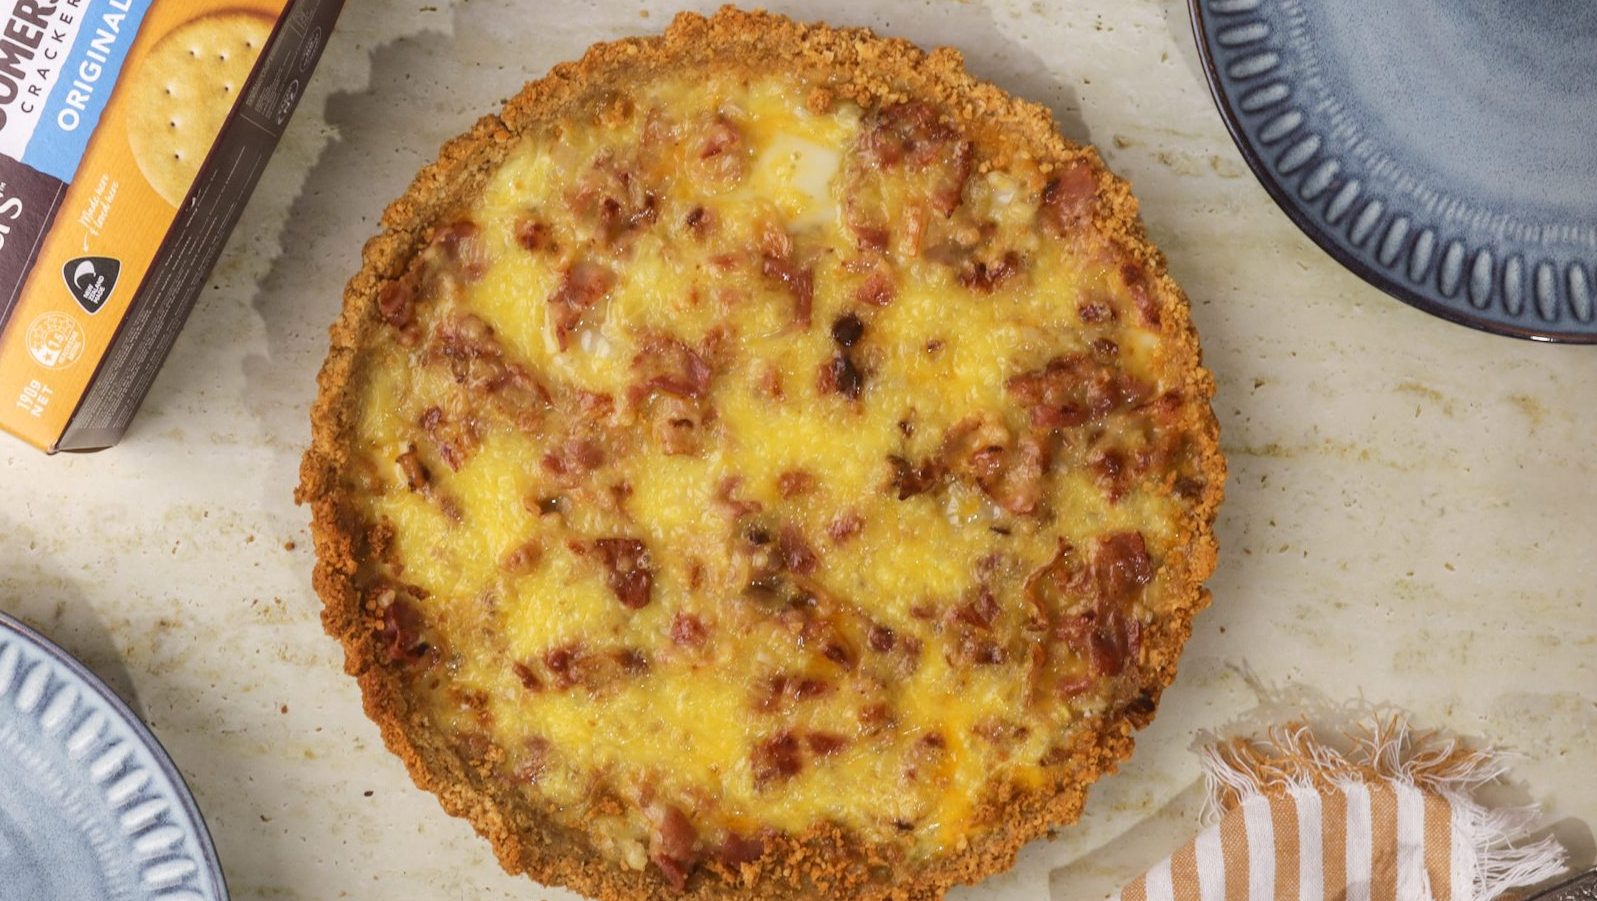 Birds eye view of a whole baked pie with pie crust and yellow filling with ham pieces.